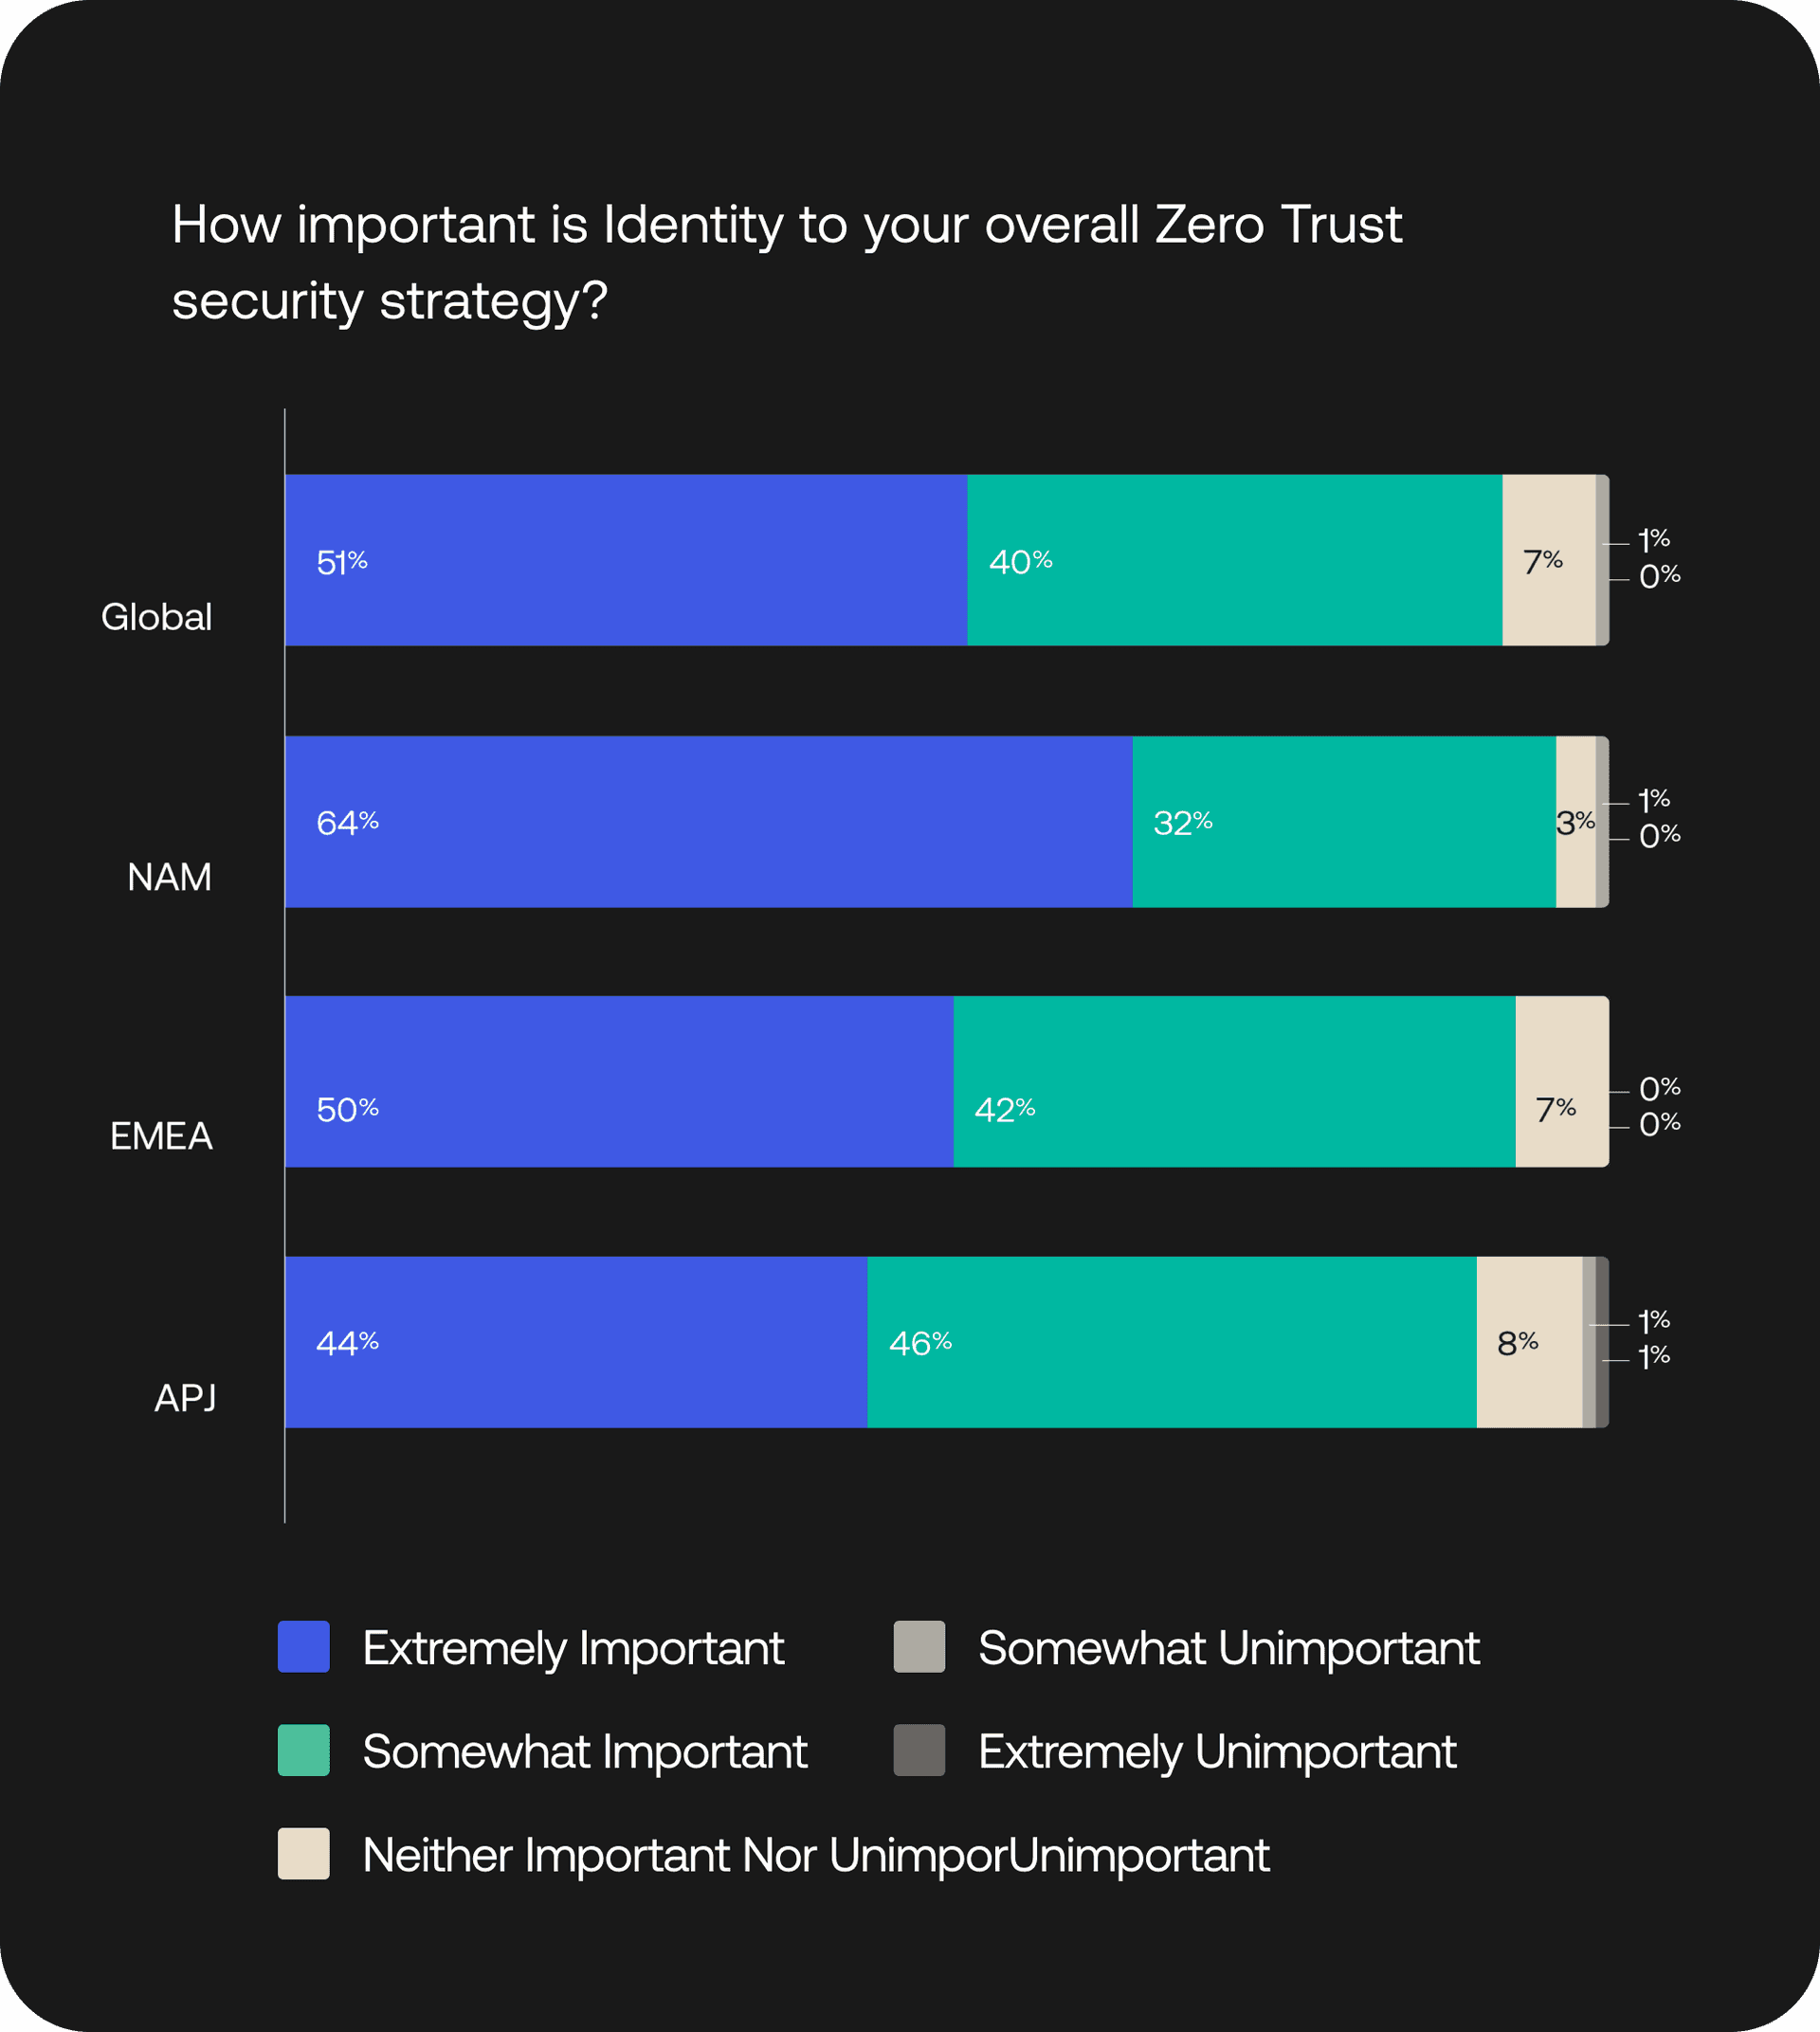 Graph showing percentages of how important Identity is to Zero Trust security strategies. 